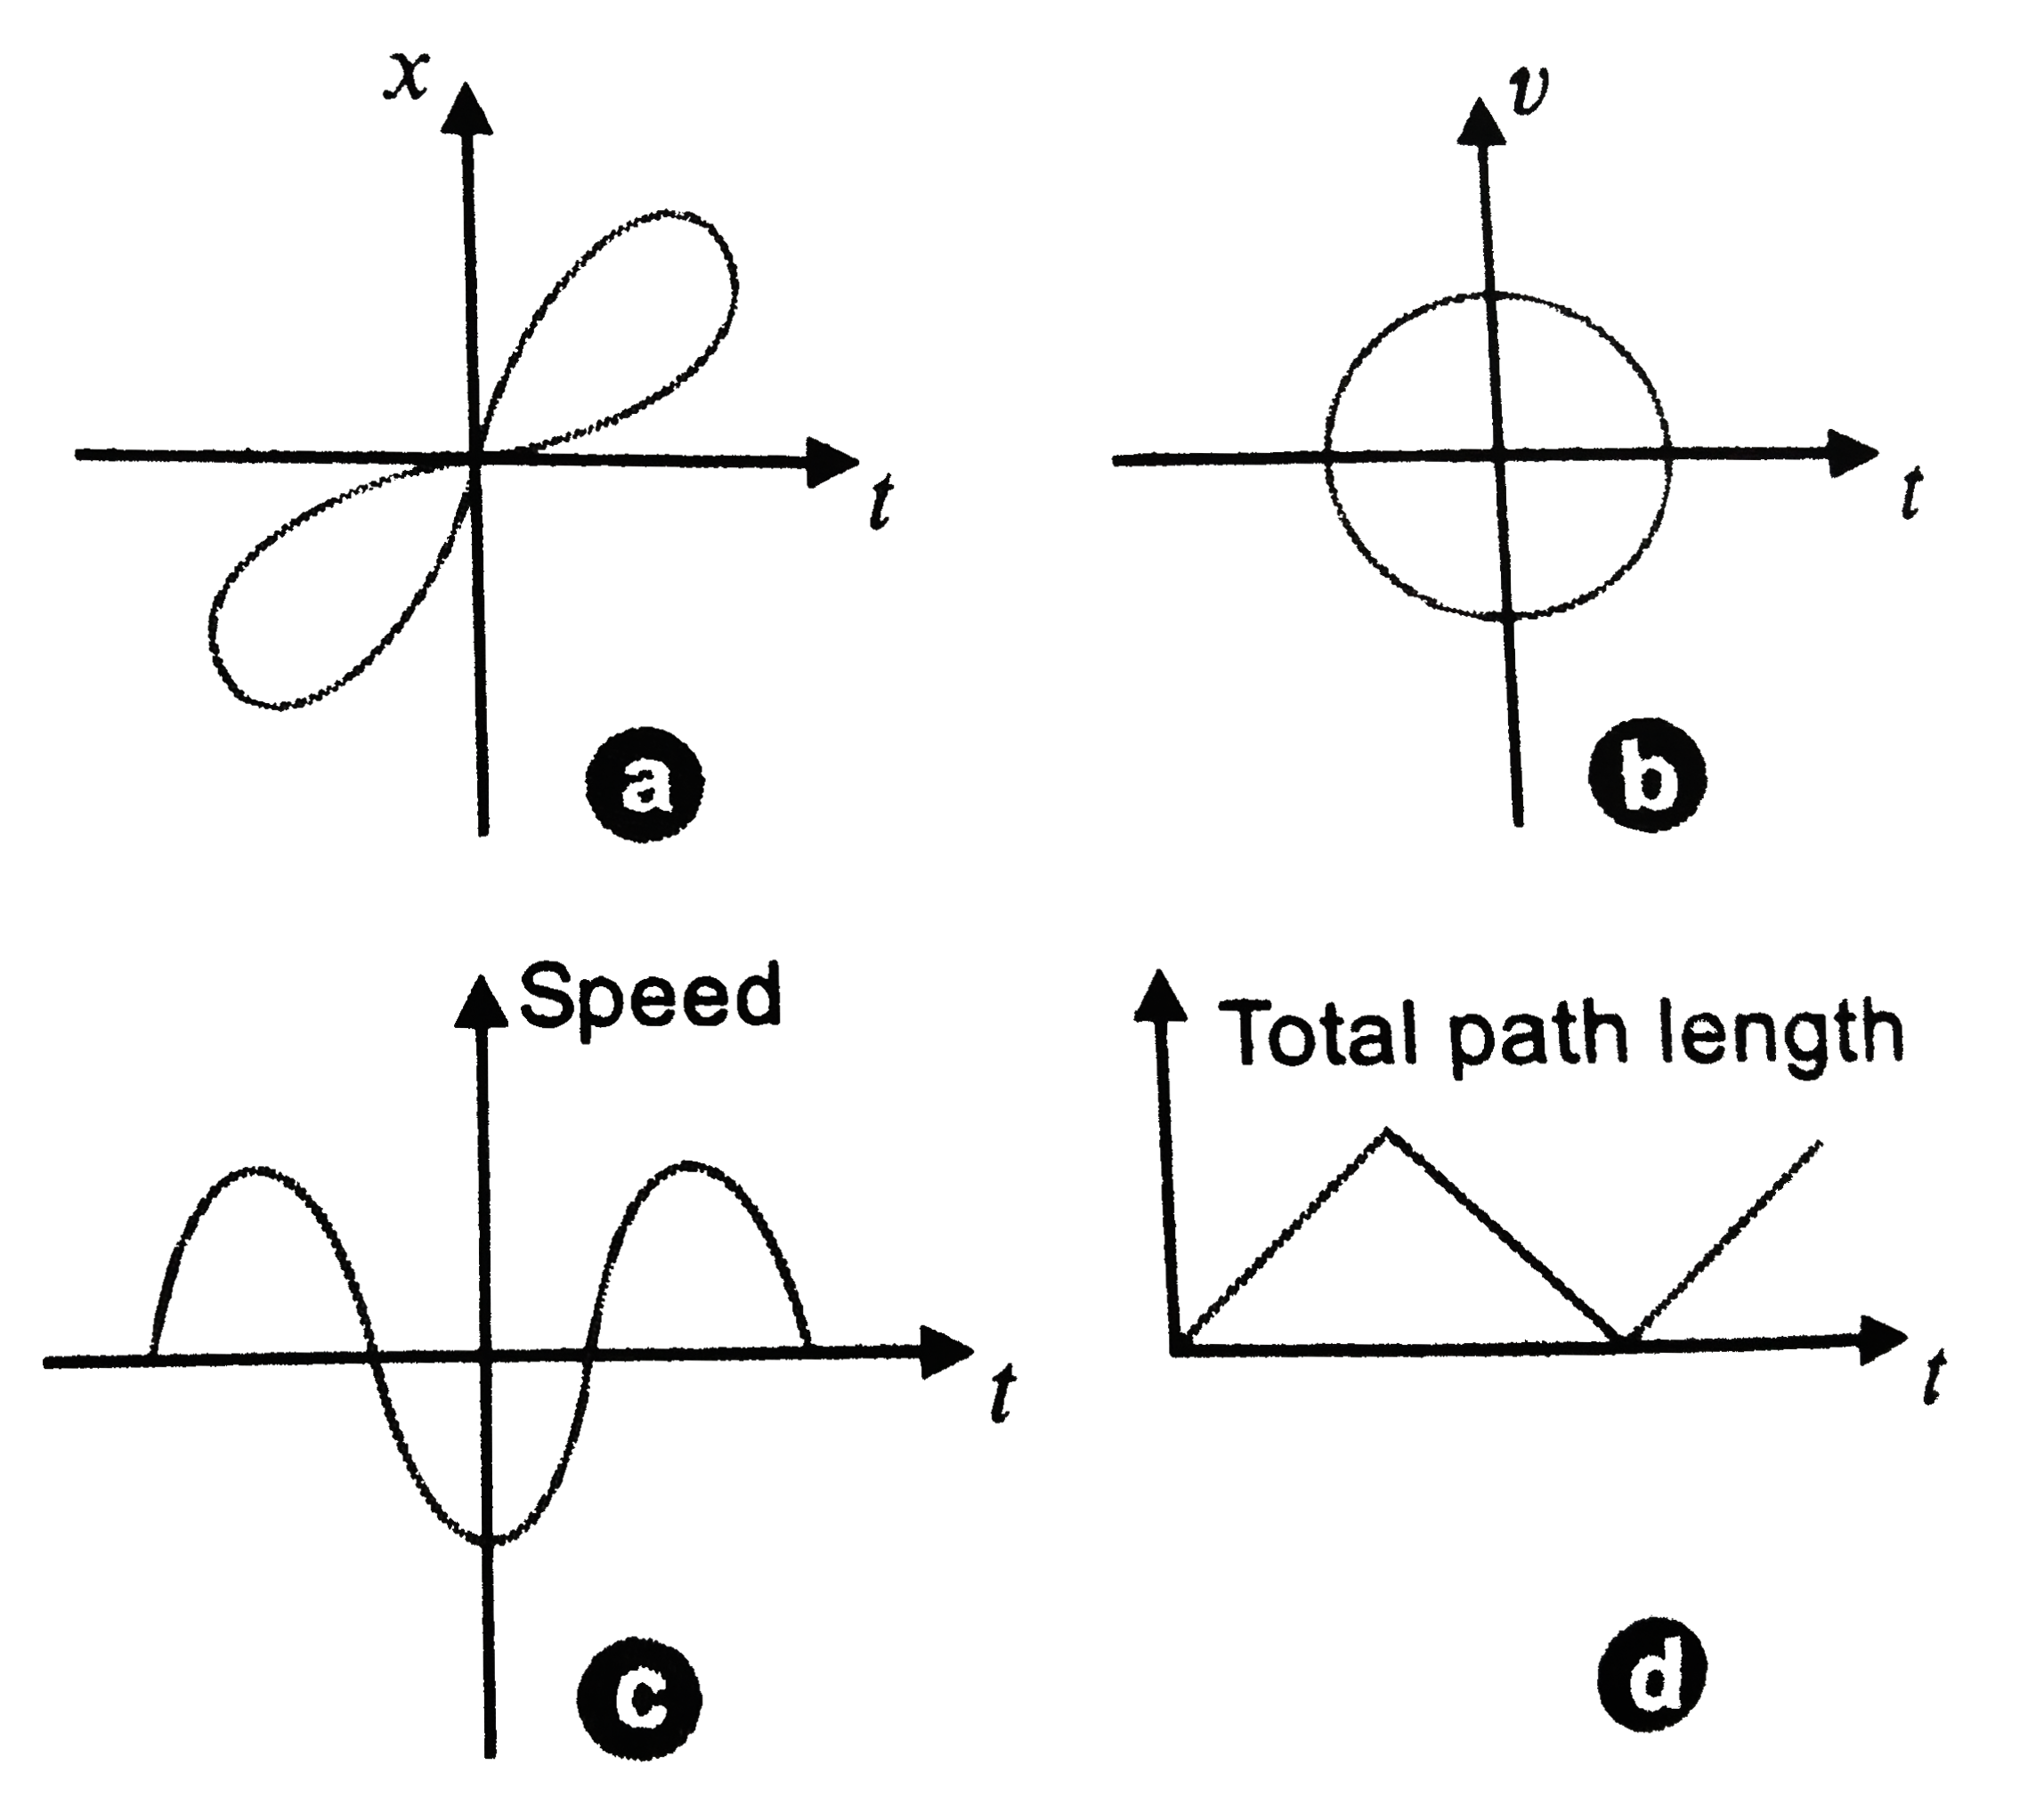 Look at the graphs Fig. 2 (NCT) .5.(a) to (d) carefully and state, with reasons, with of these connot possibly represent one dimensional motion of a particle.